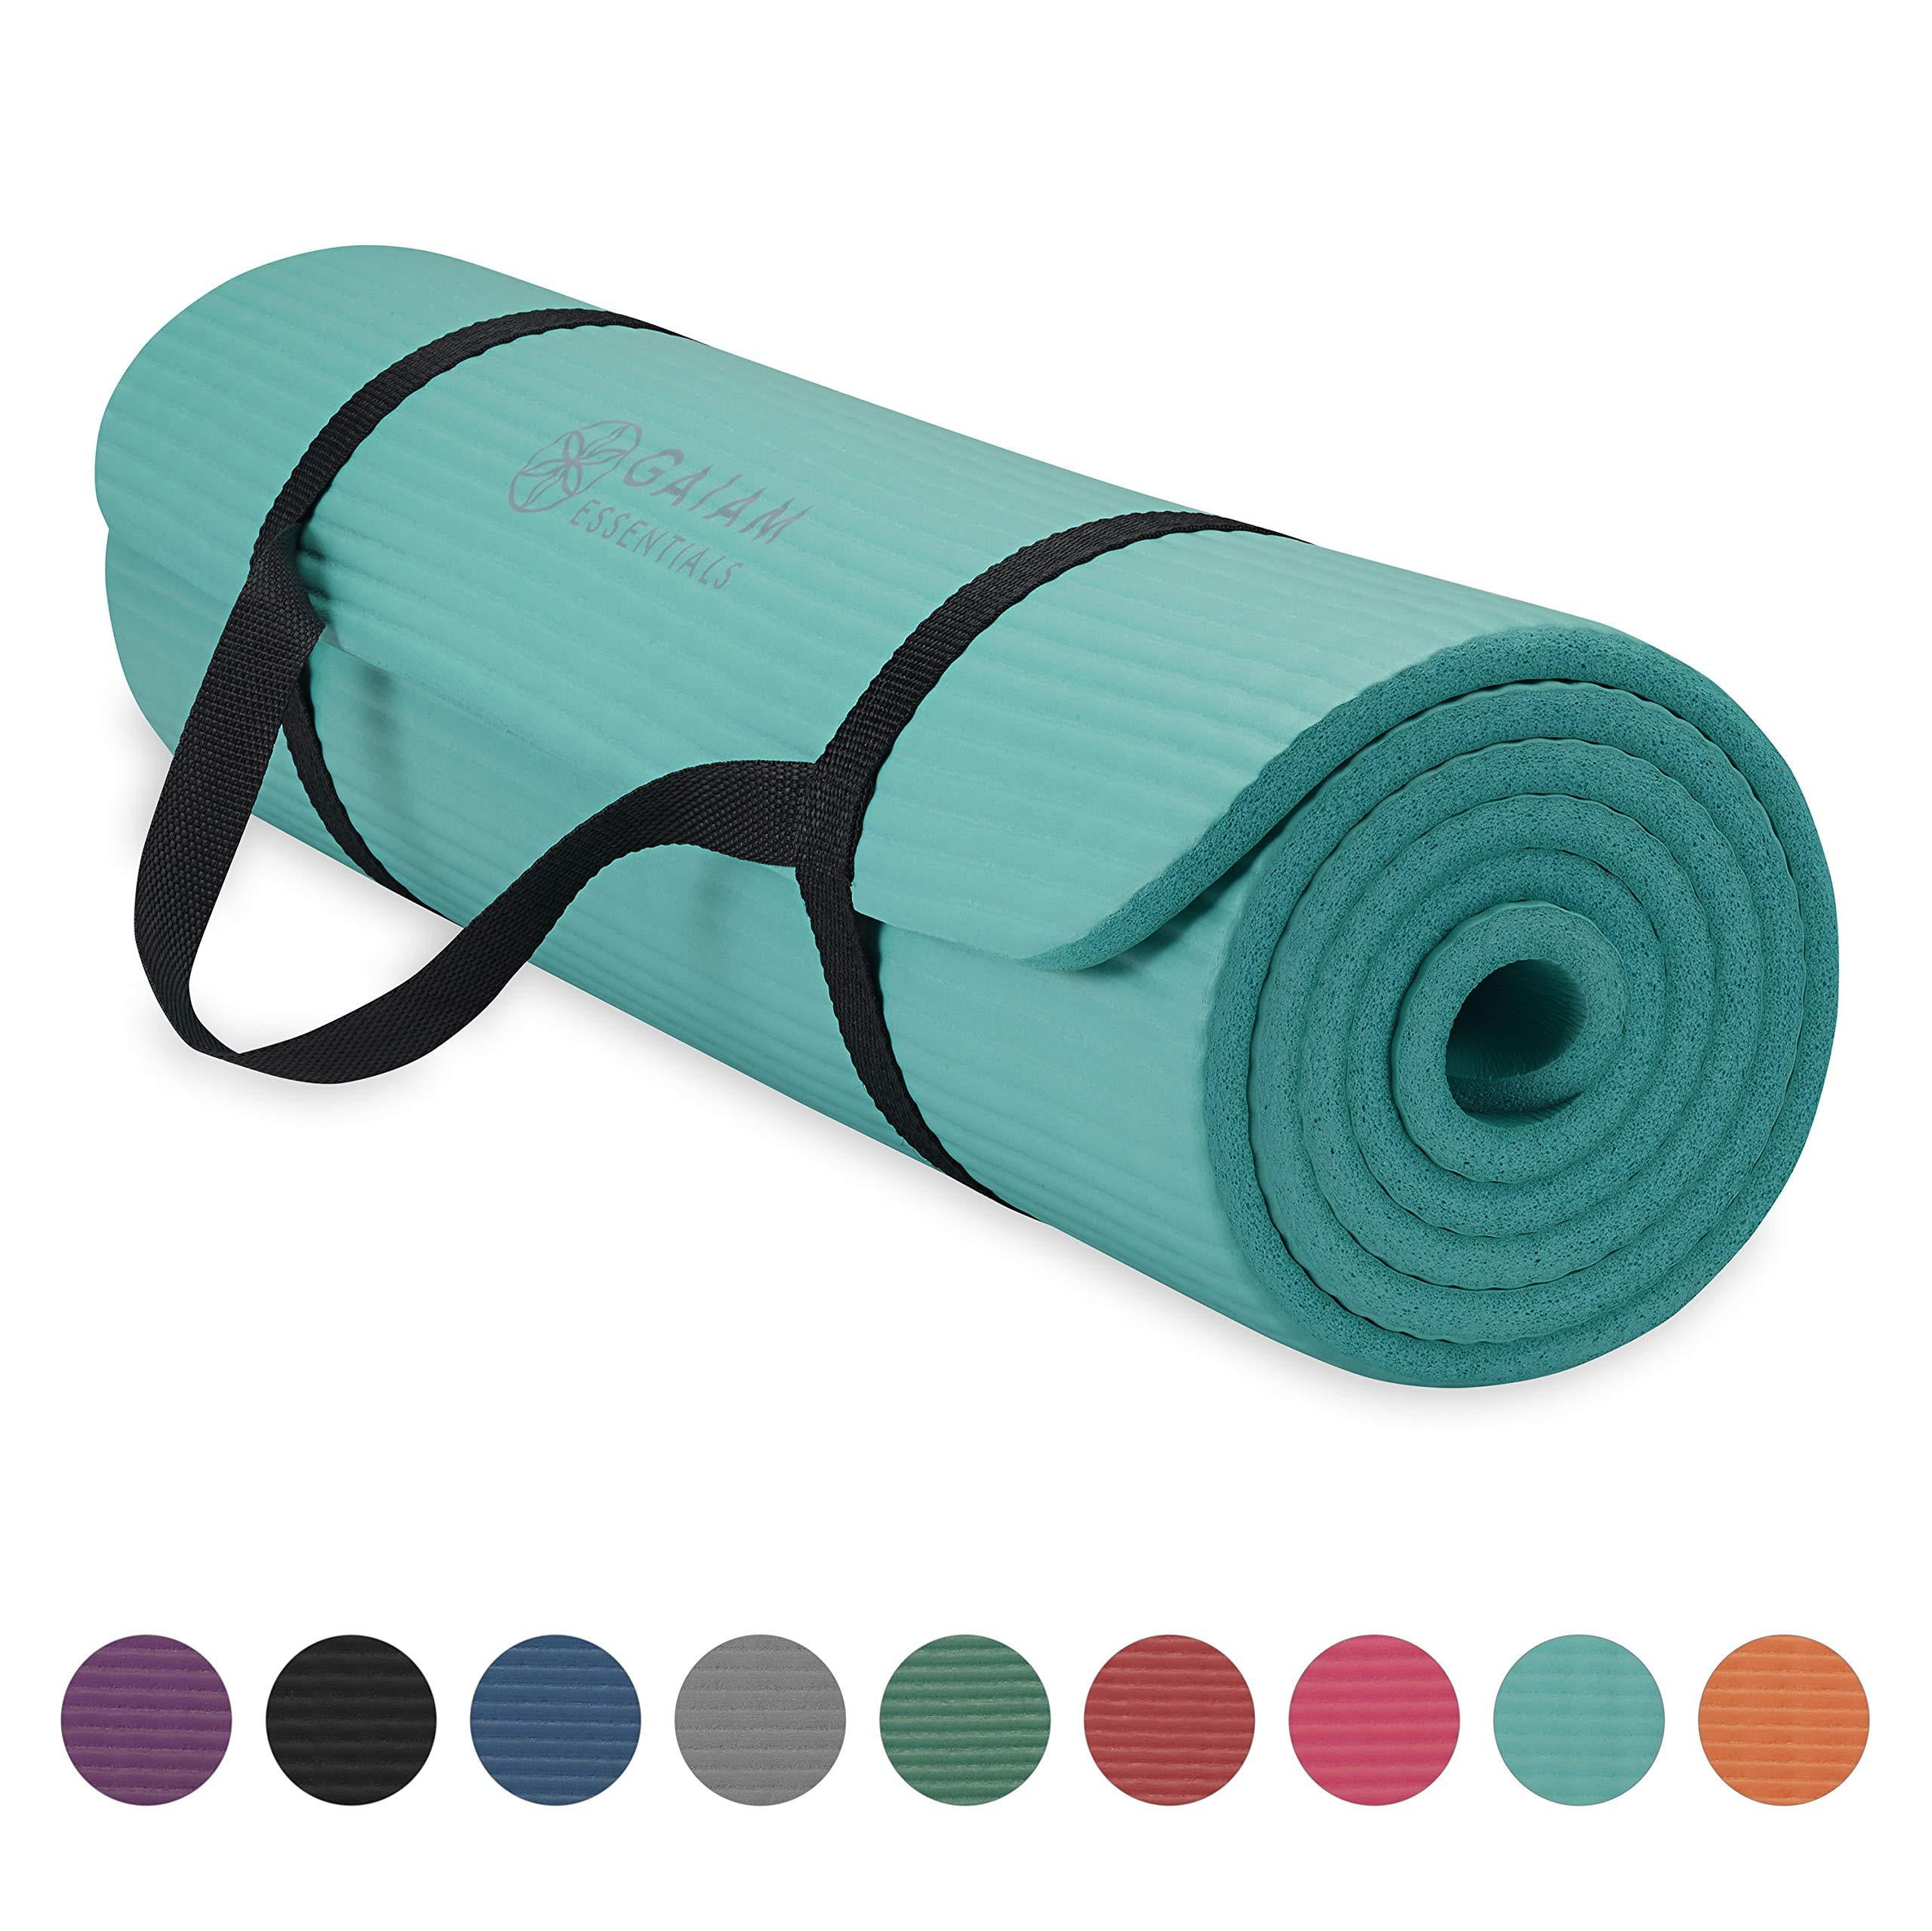 Yoga Mat High Density Thick Exercise Fitness Pilates Gym Workout 75" L X 39" W 